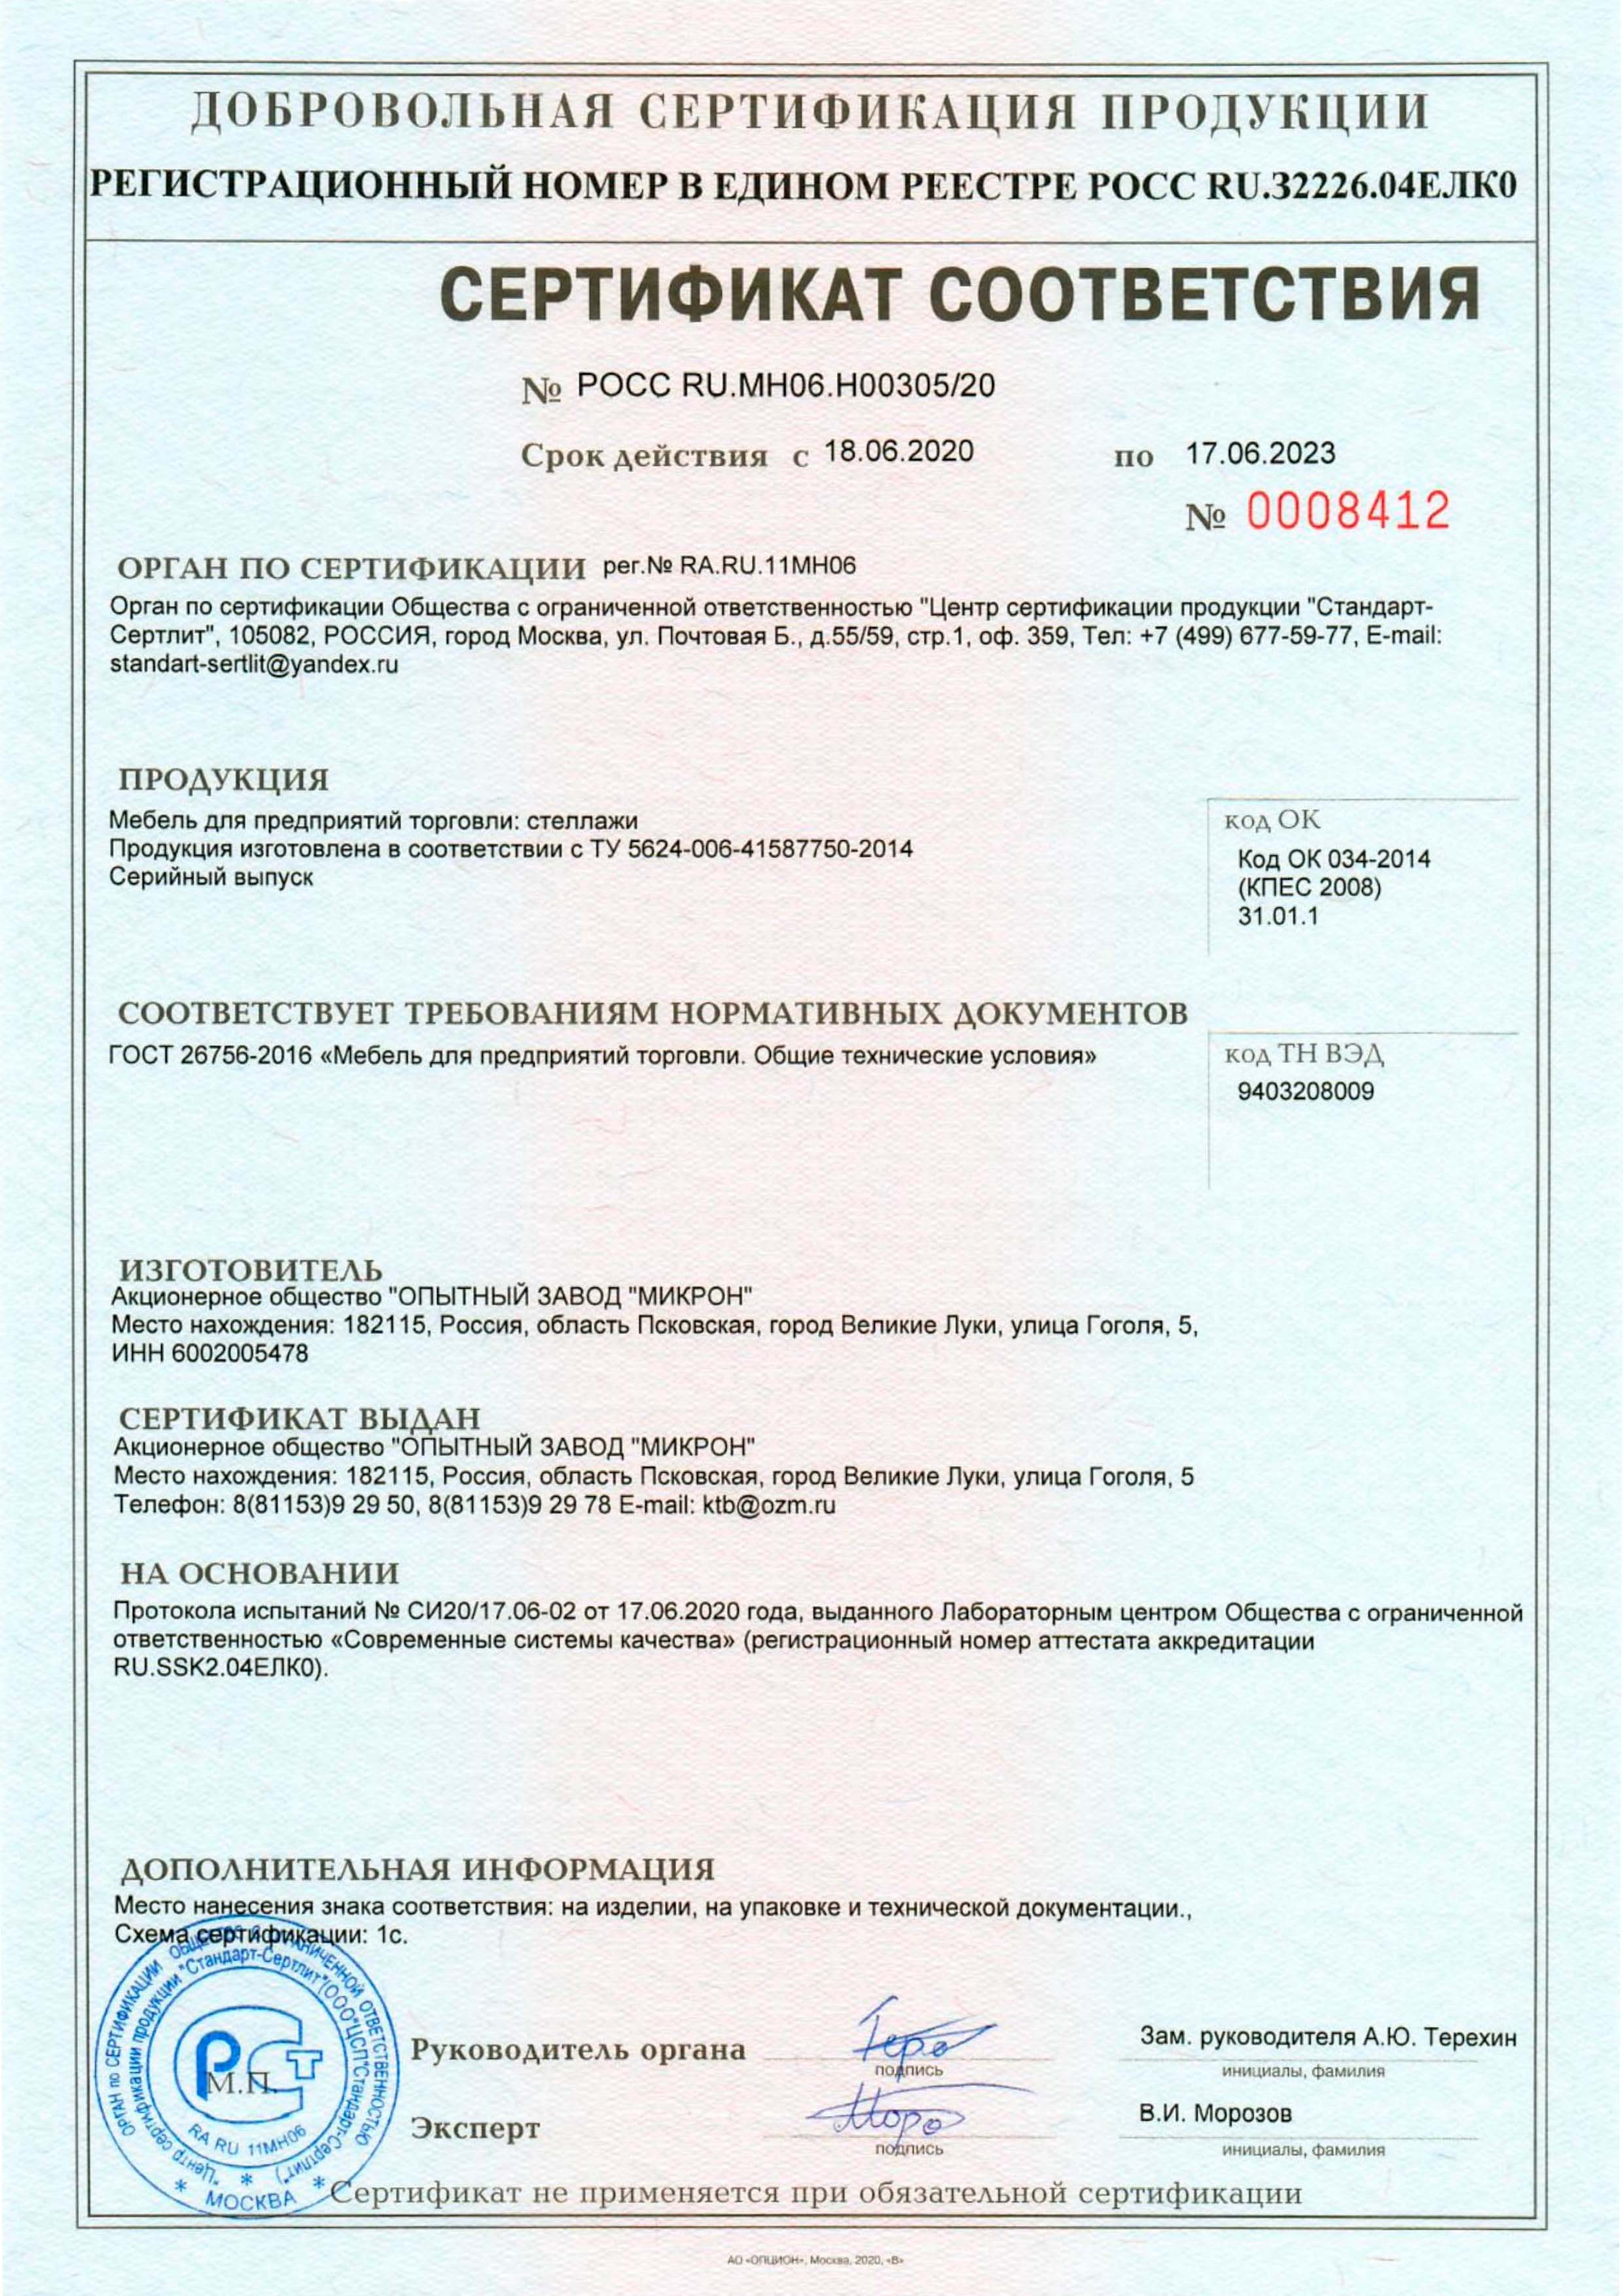 Federal Agency for Technical Regulation and Metrology. Certificate of Conformity